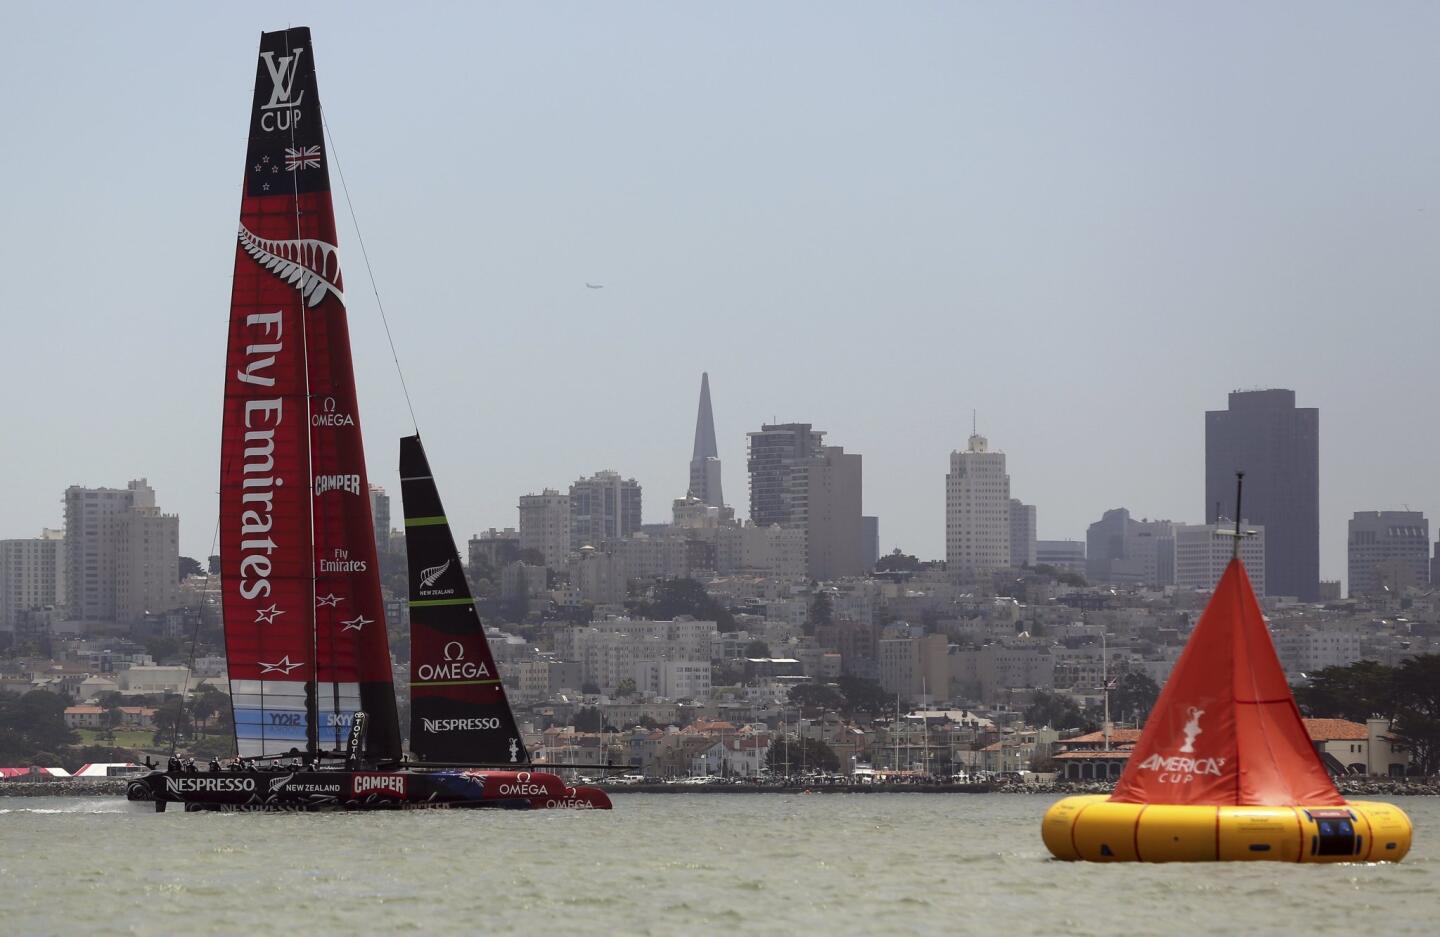 Emirates Team New Zealand sails toward a mark during the round robin one yacht races of the Luis Vuitton Cup challenger series in the 34th America's Cup in San Francisco